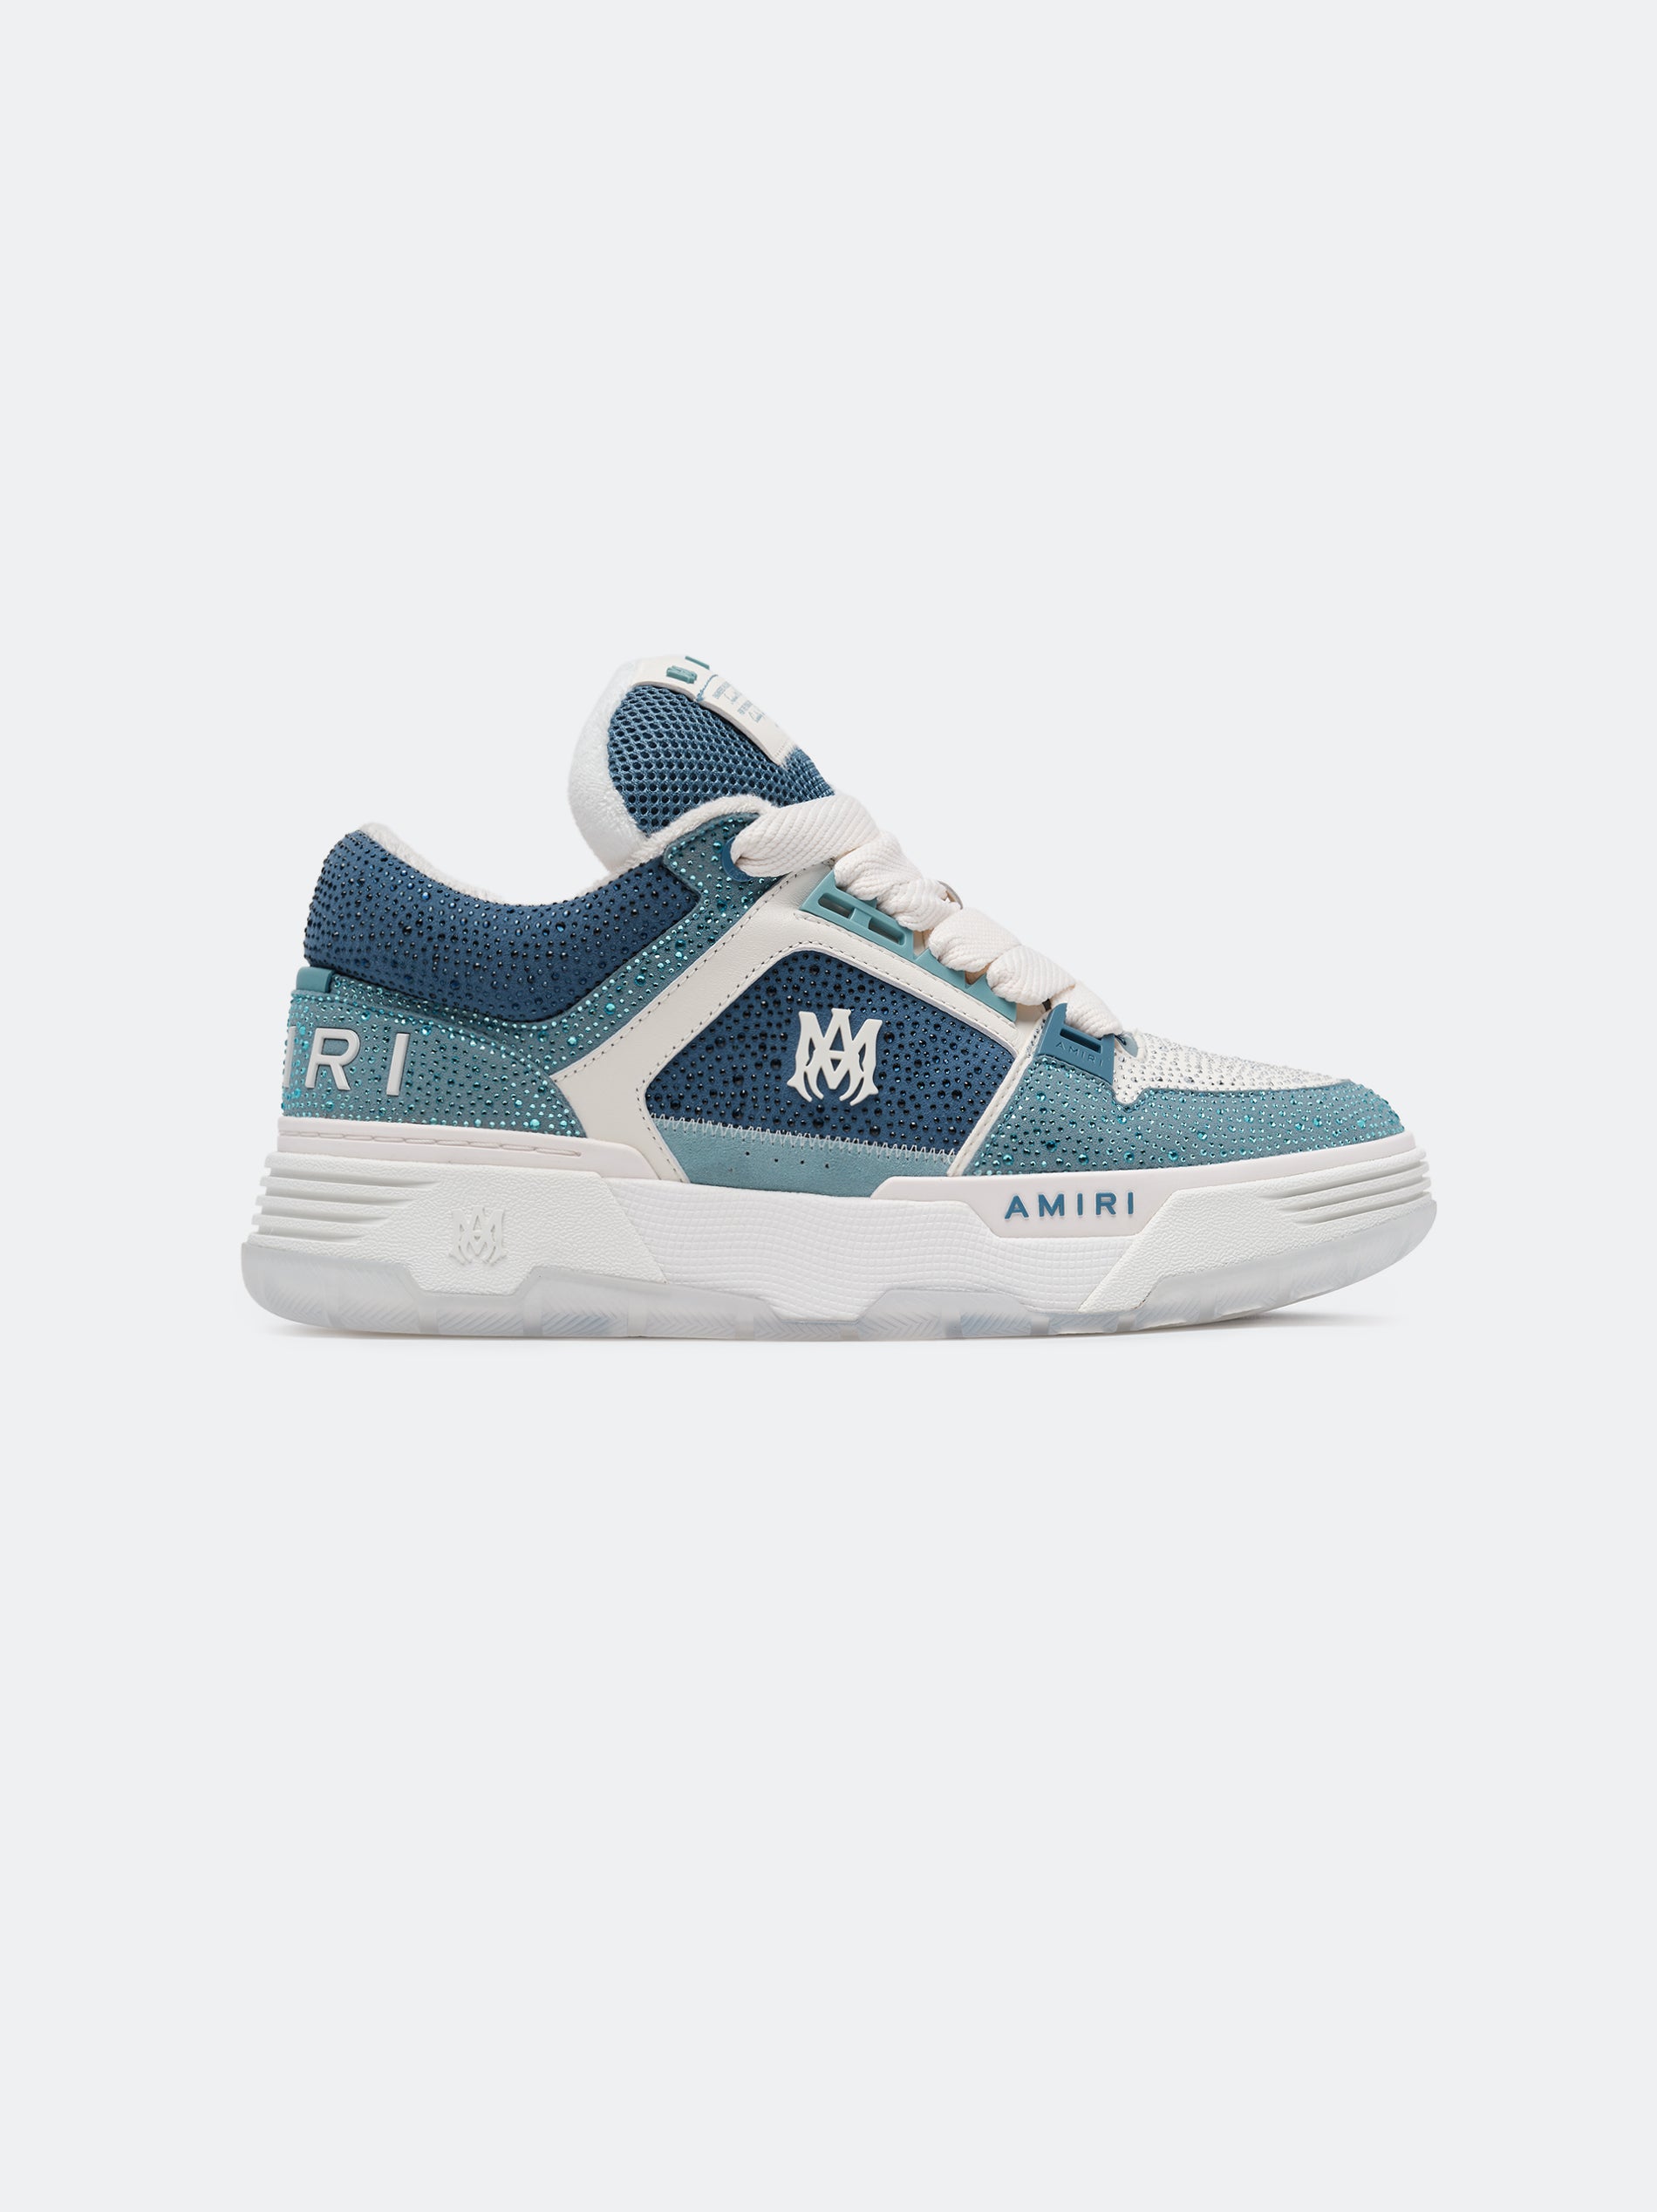 Product WOMEN - WOMEN'S CRYSTAL MA-1 - Dusty Blue featured image